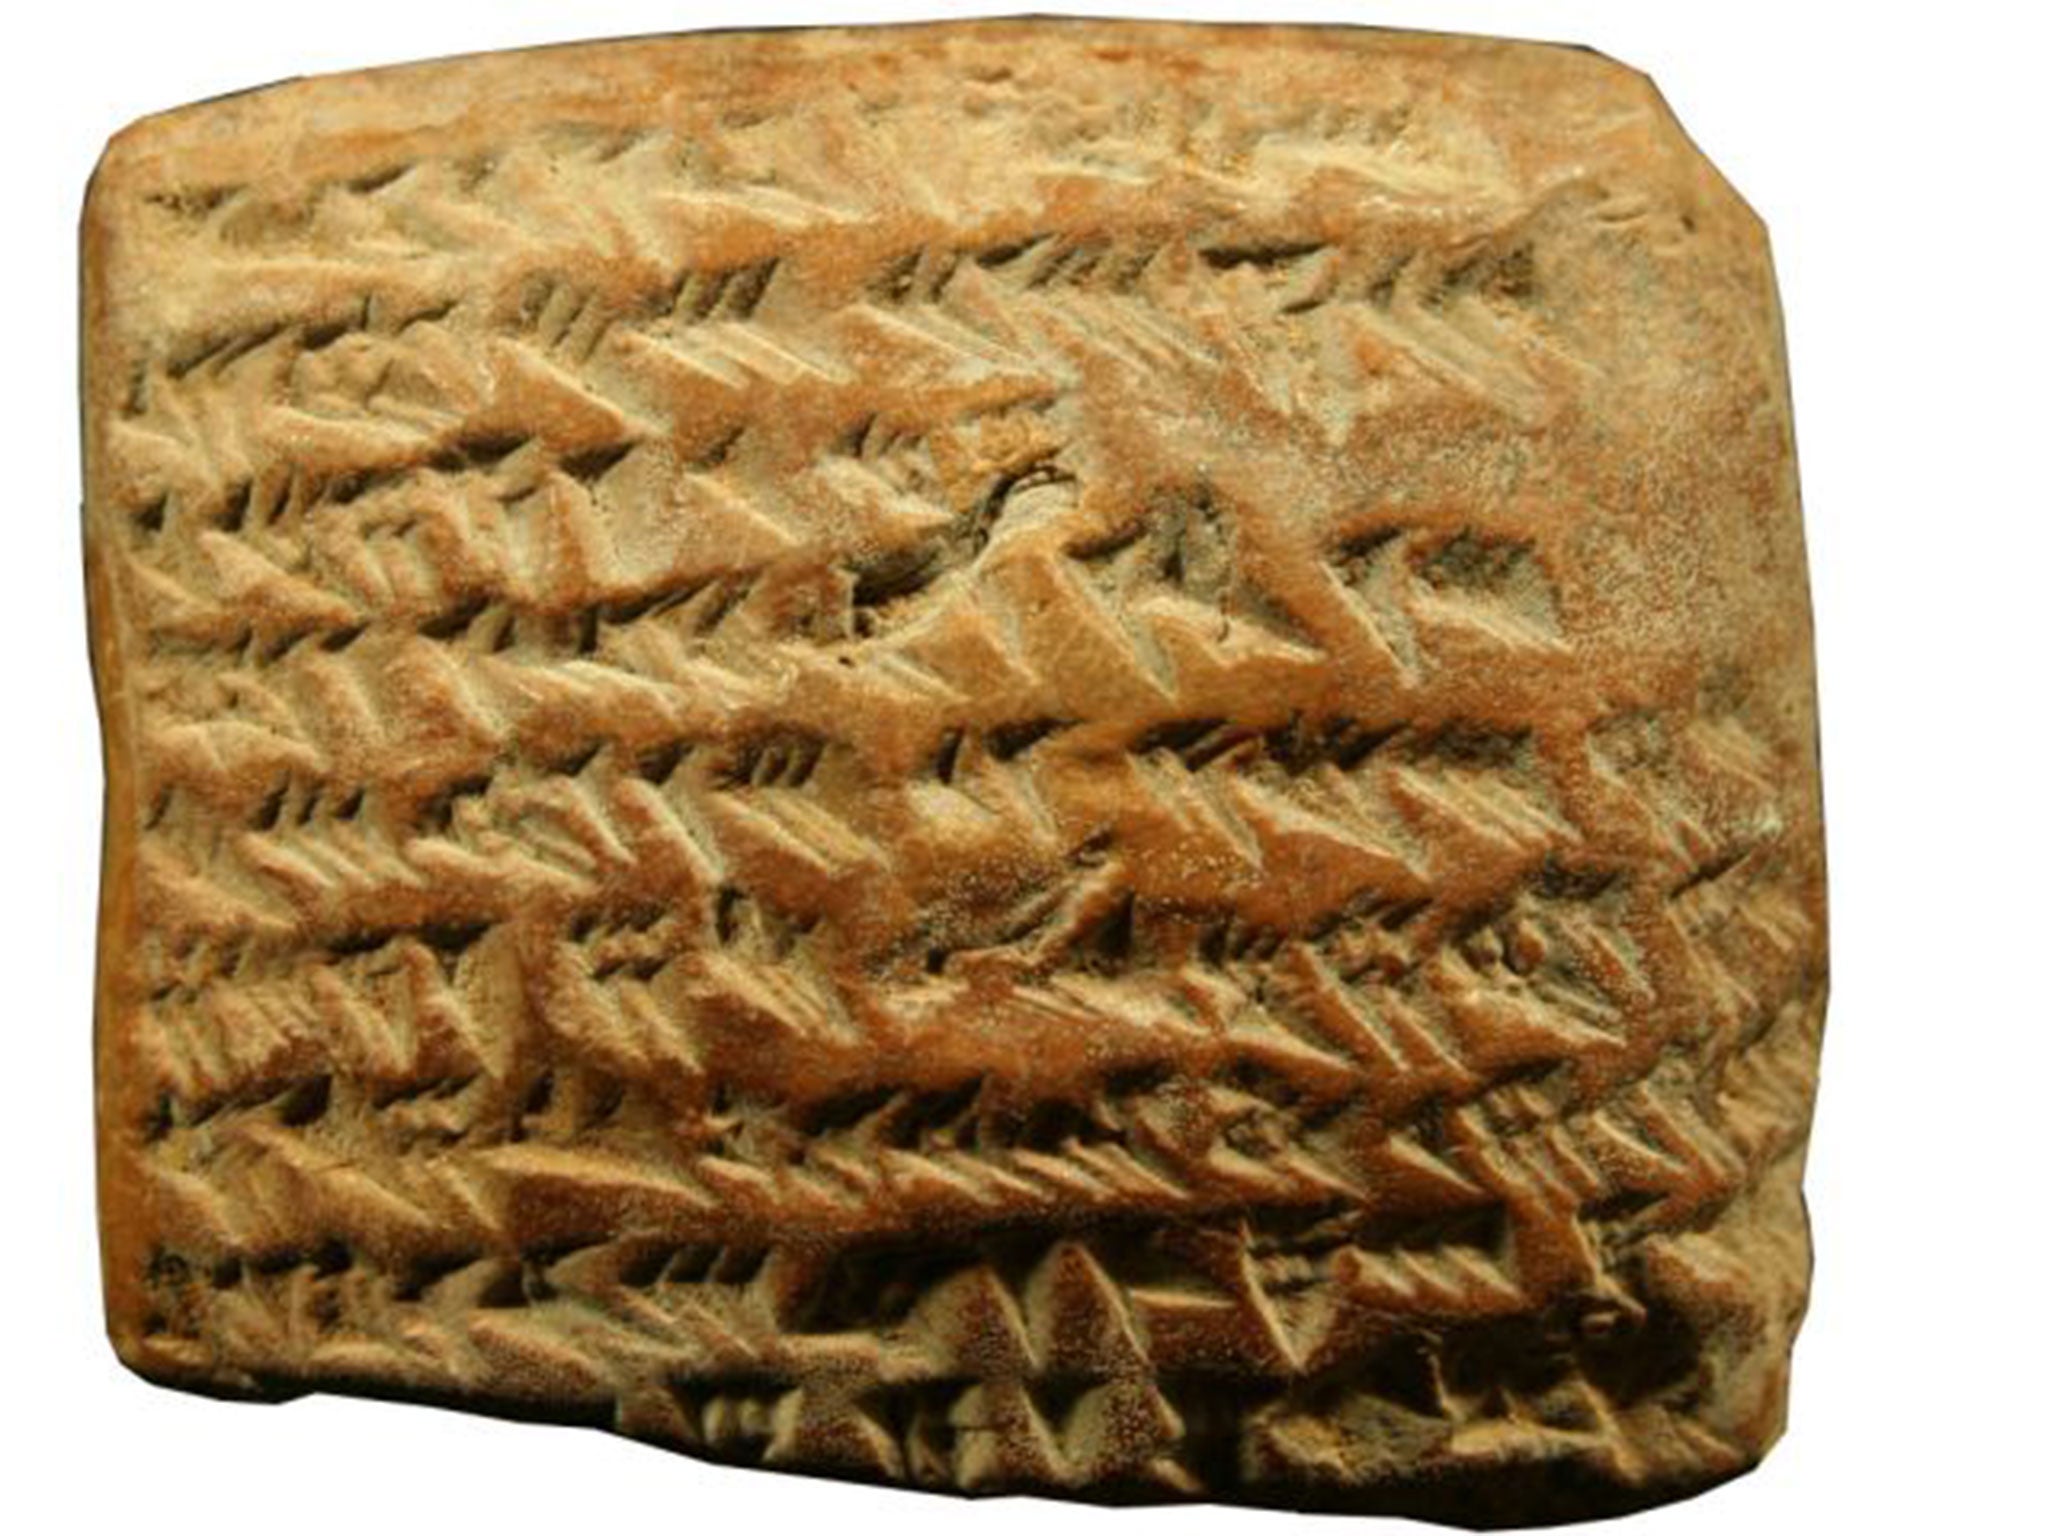 One of the clay tablets containing the cuneiform text